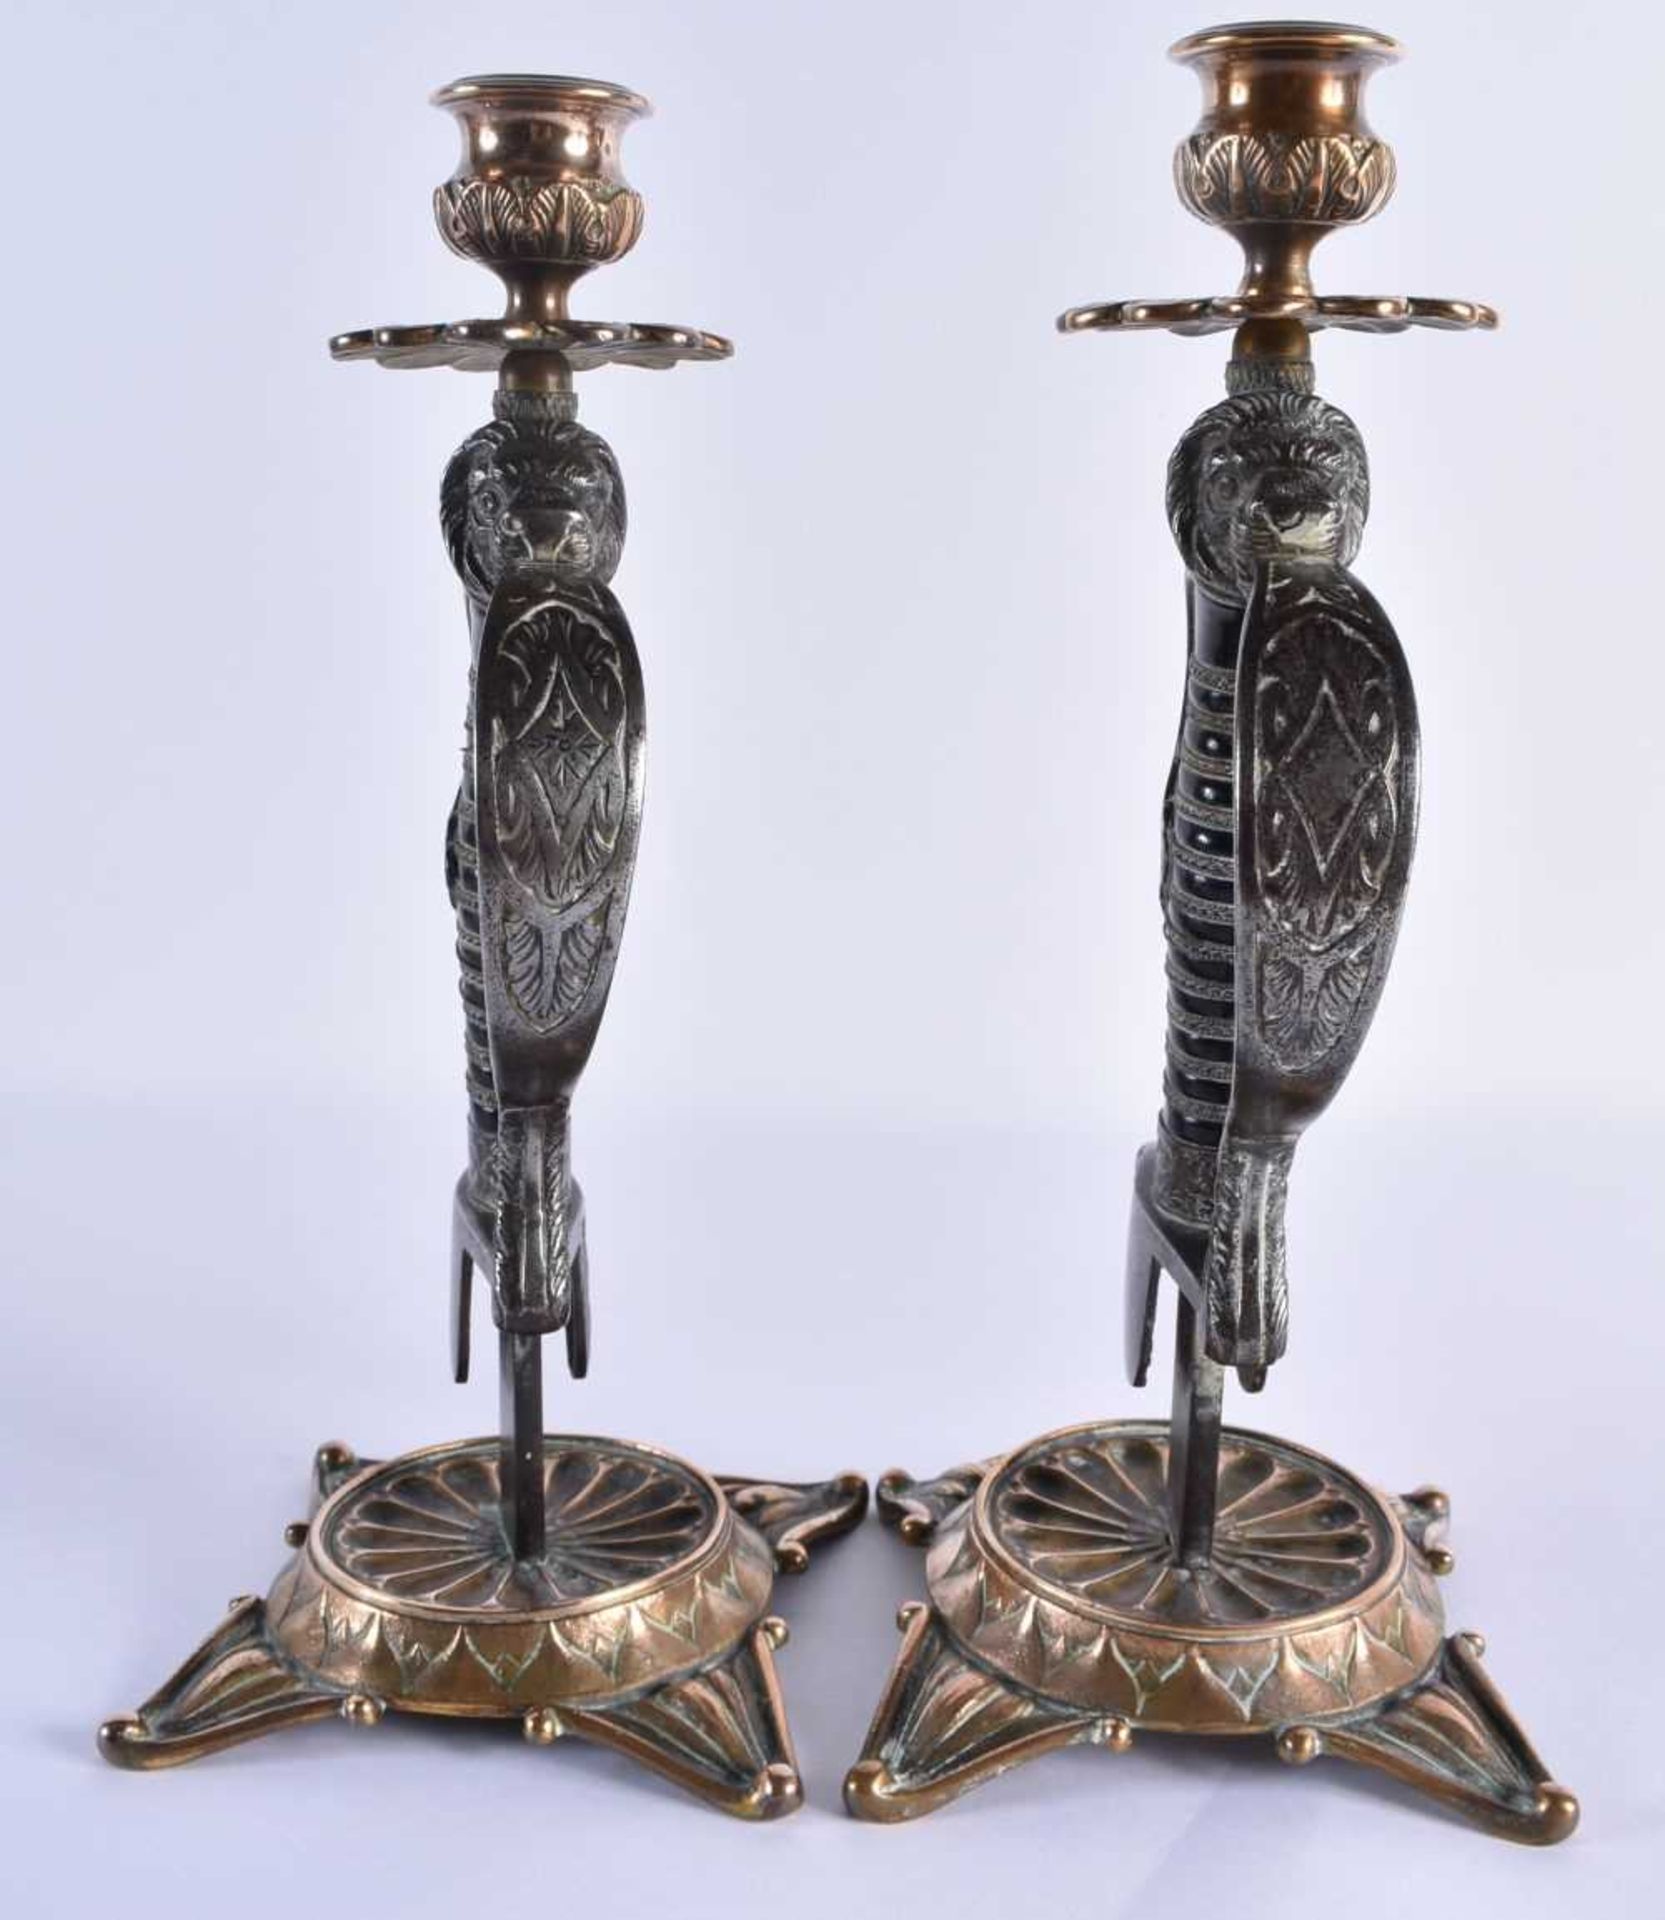 A LOVELY PAIR OF 19TH CENTURY ENGLISH COUNTRY HOUSE MILITARY INTEREST CANDLESTICKS formed as steel - Image 5 of 8